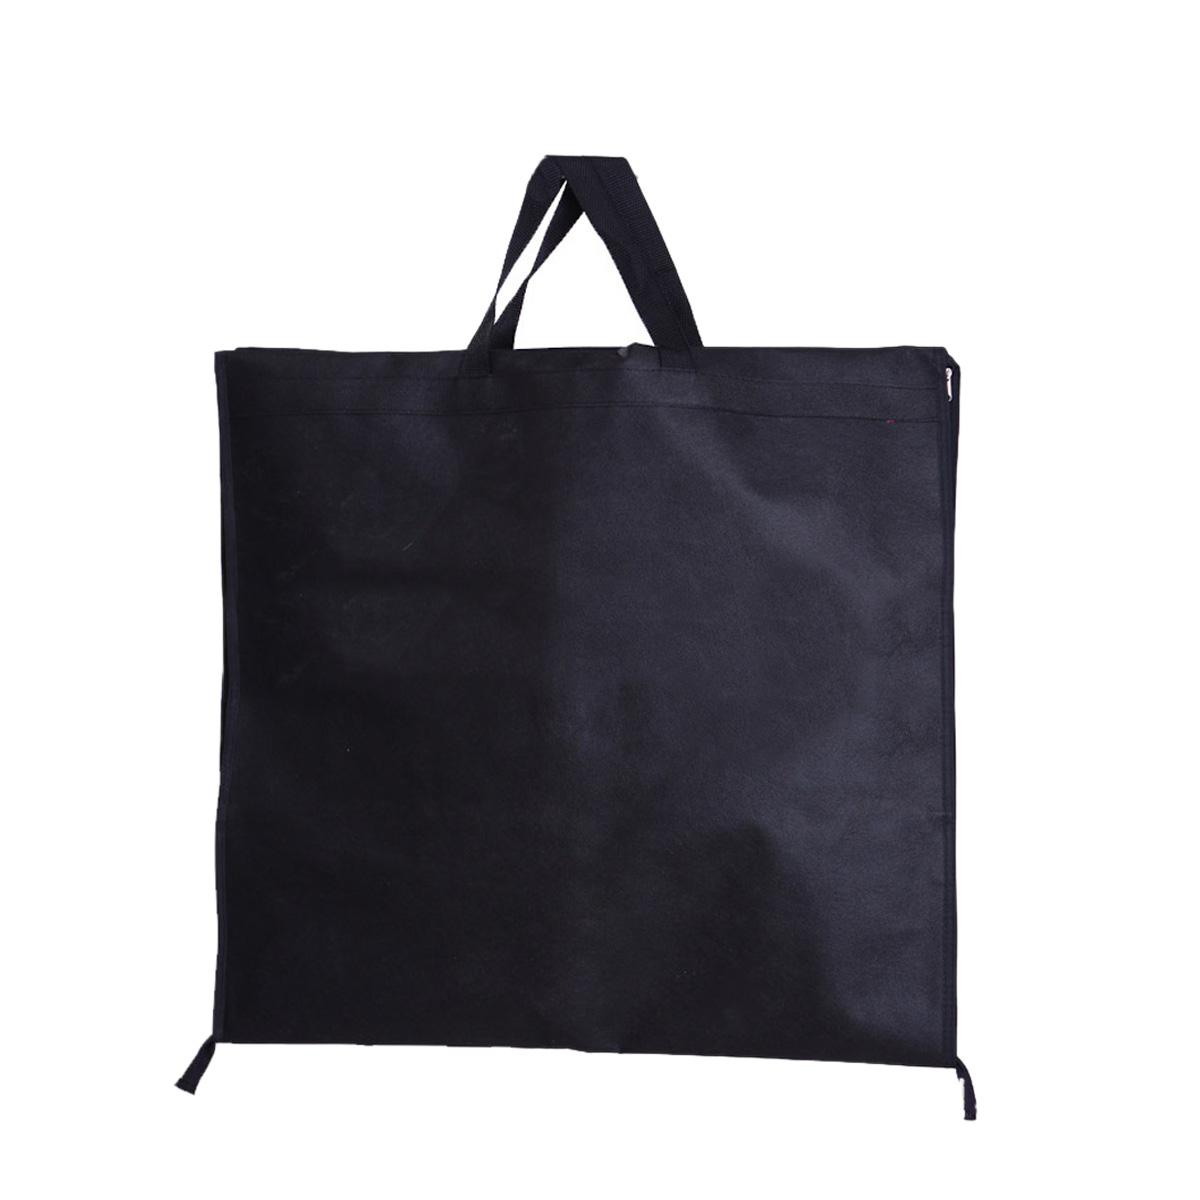 Protective Portable Folding Non-woven Fabric Dust Proof Cover